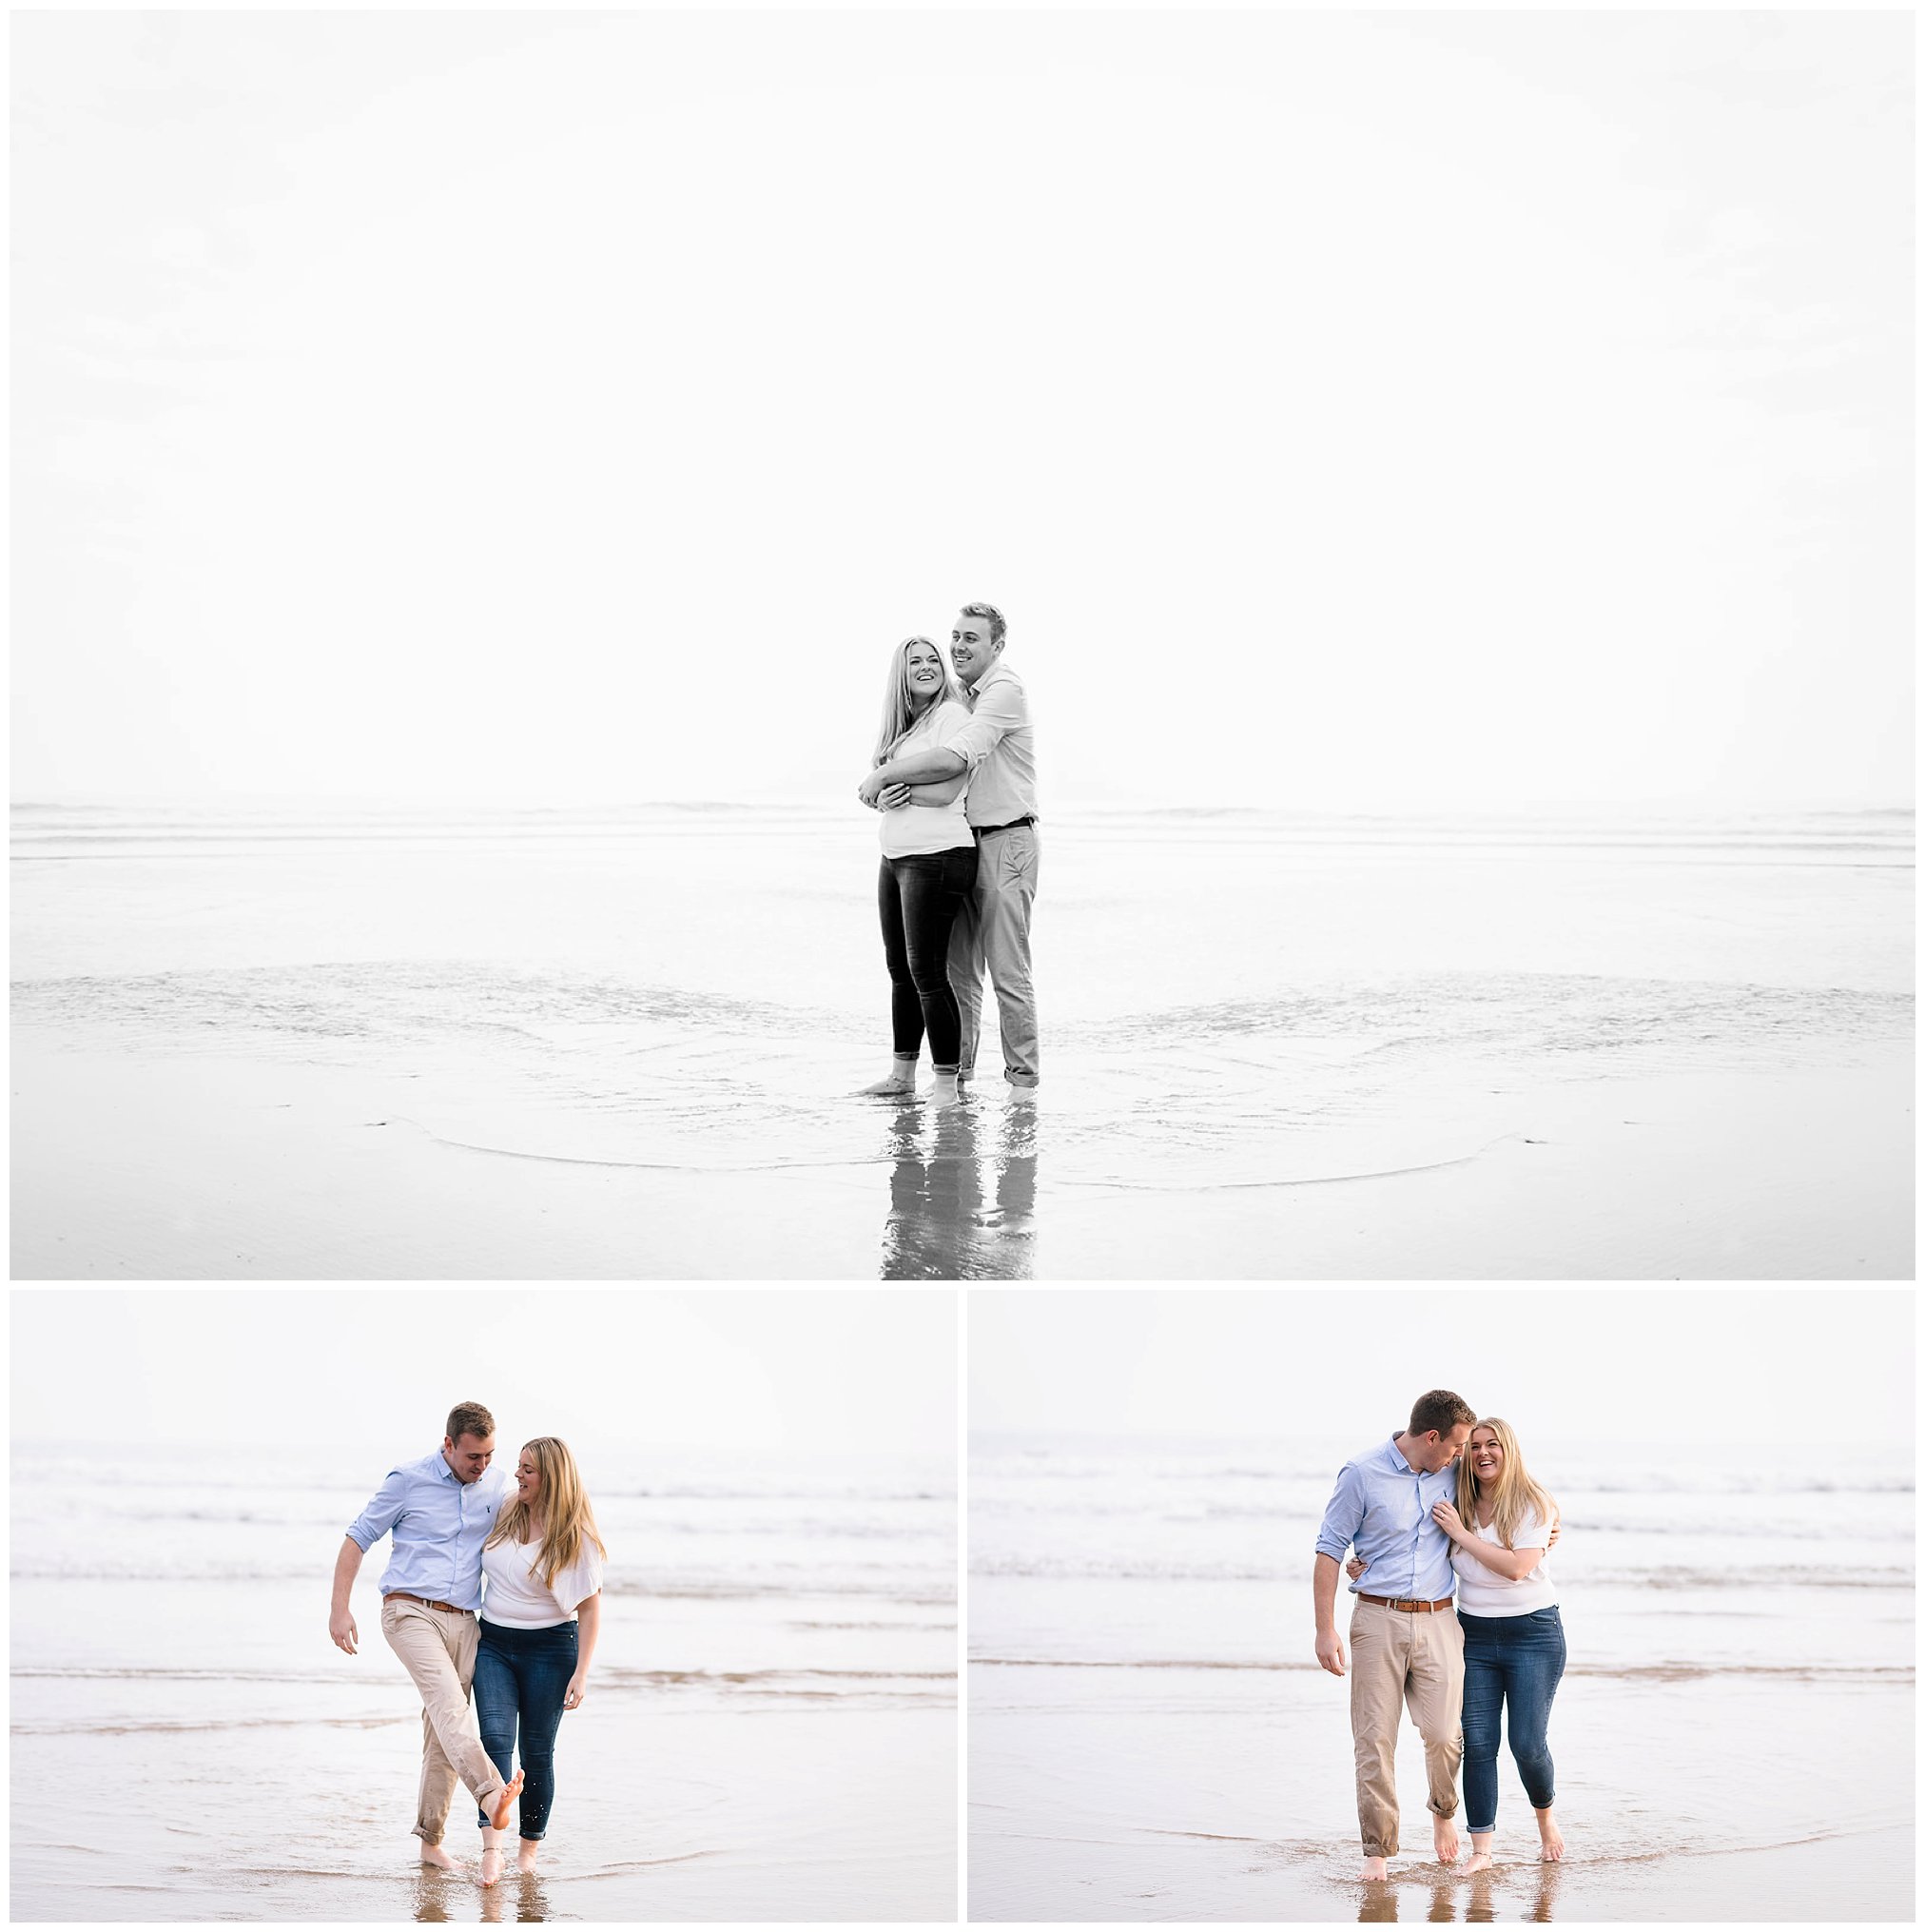 Engagement Photographer wales, Engagement photos of couple to be married.